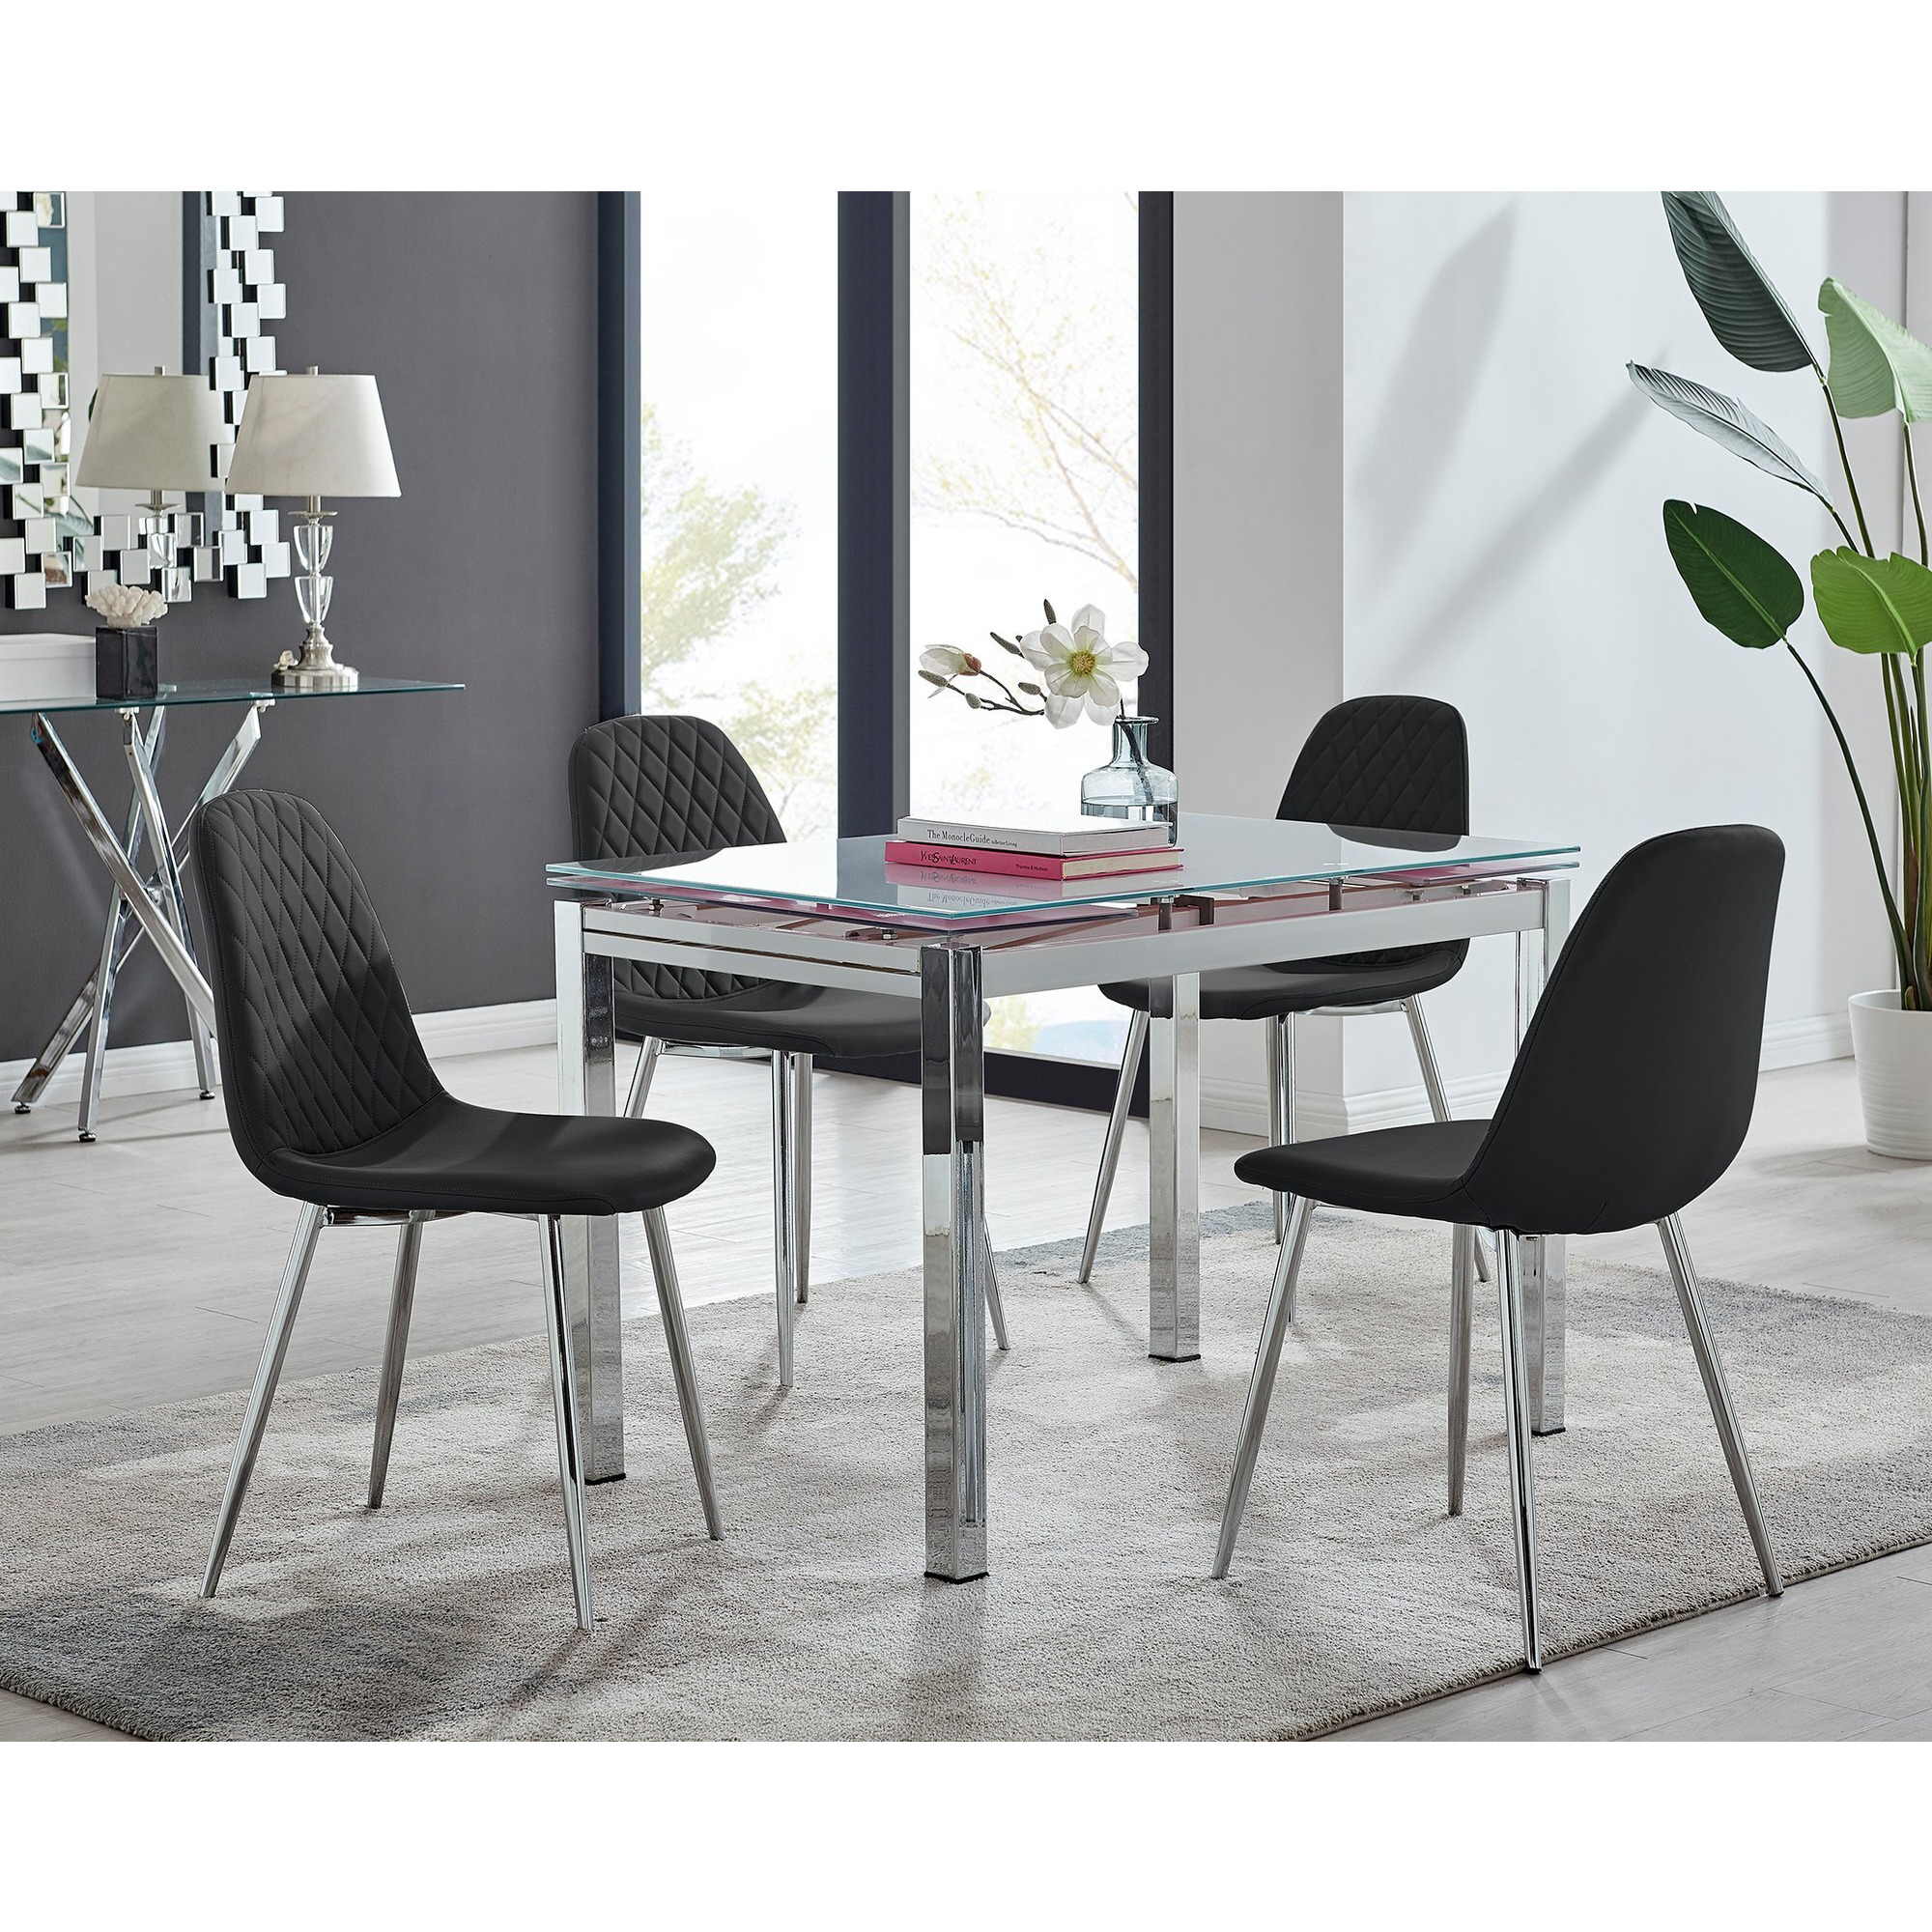 Enna White Glass Extending Dining Table and 4 Corona Silver Leg Chairs